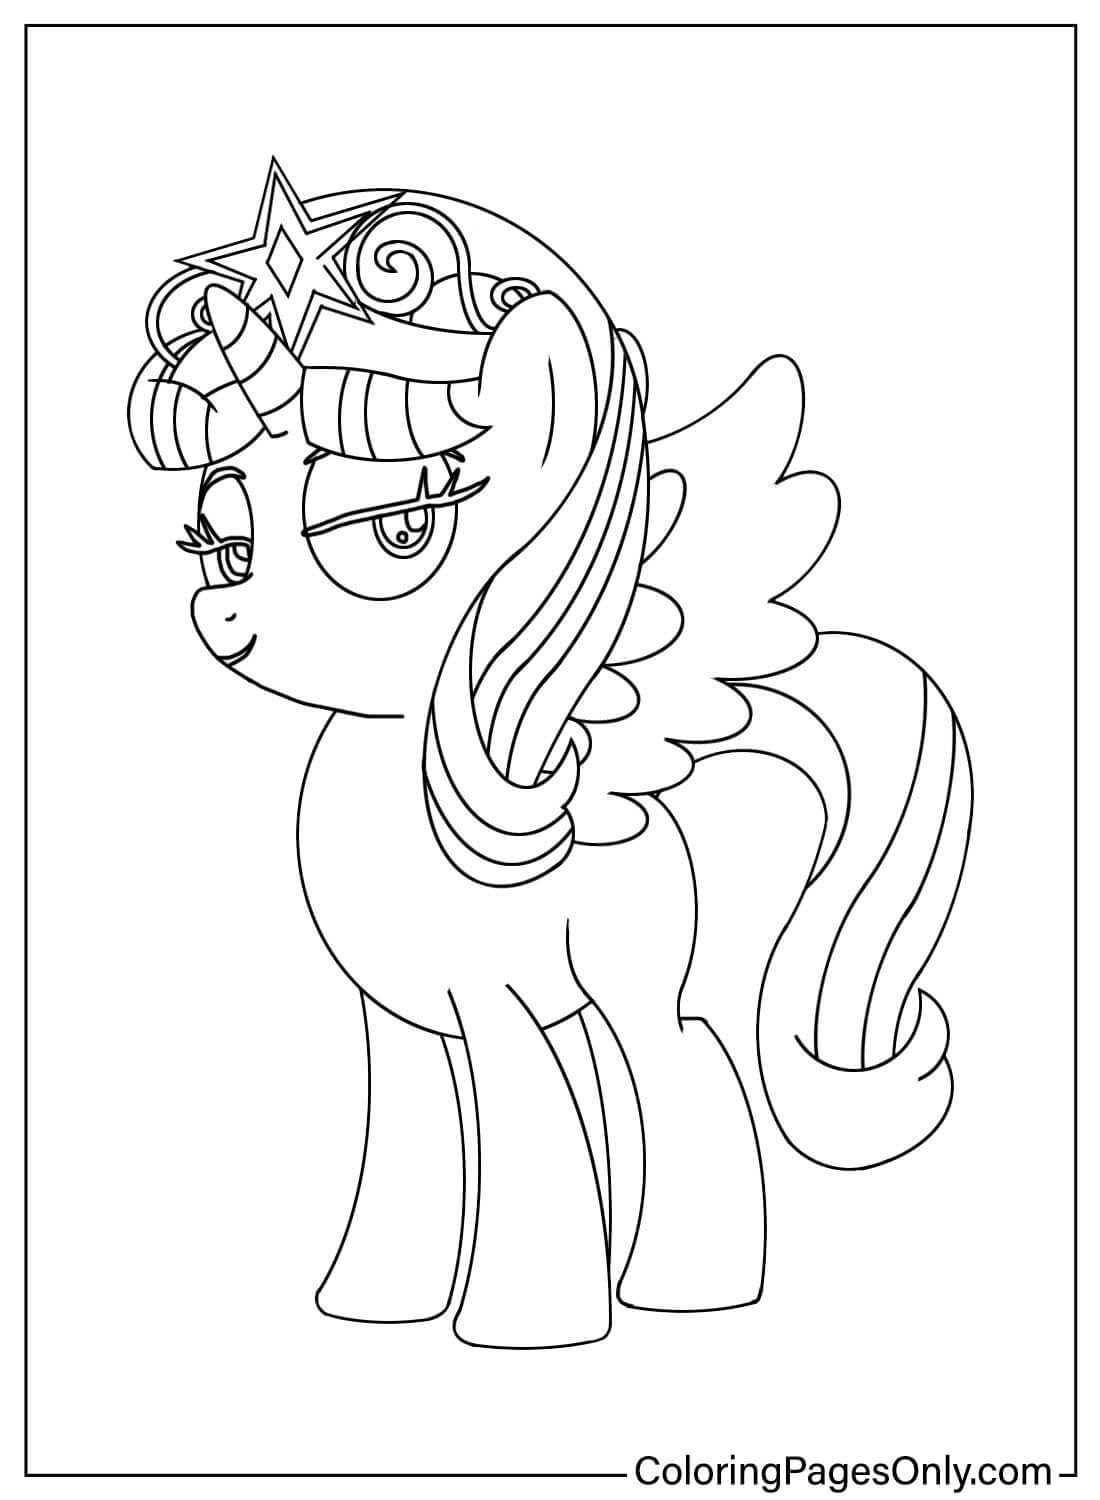 Starlight Glimmer Coloring To Print from Starlight Glimmer